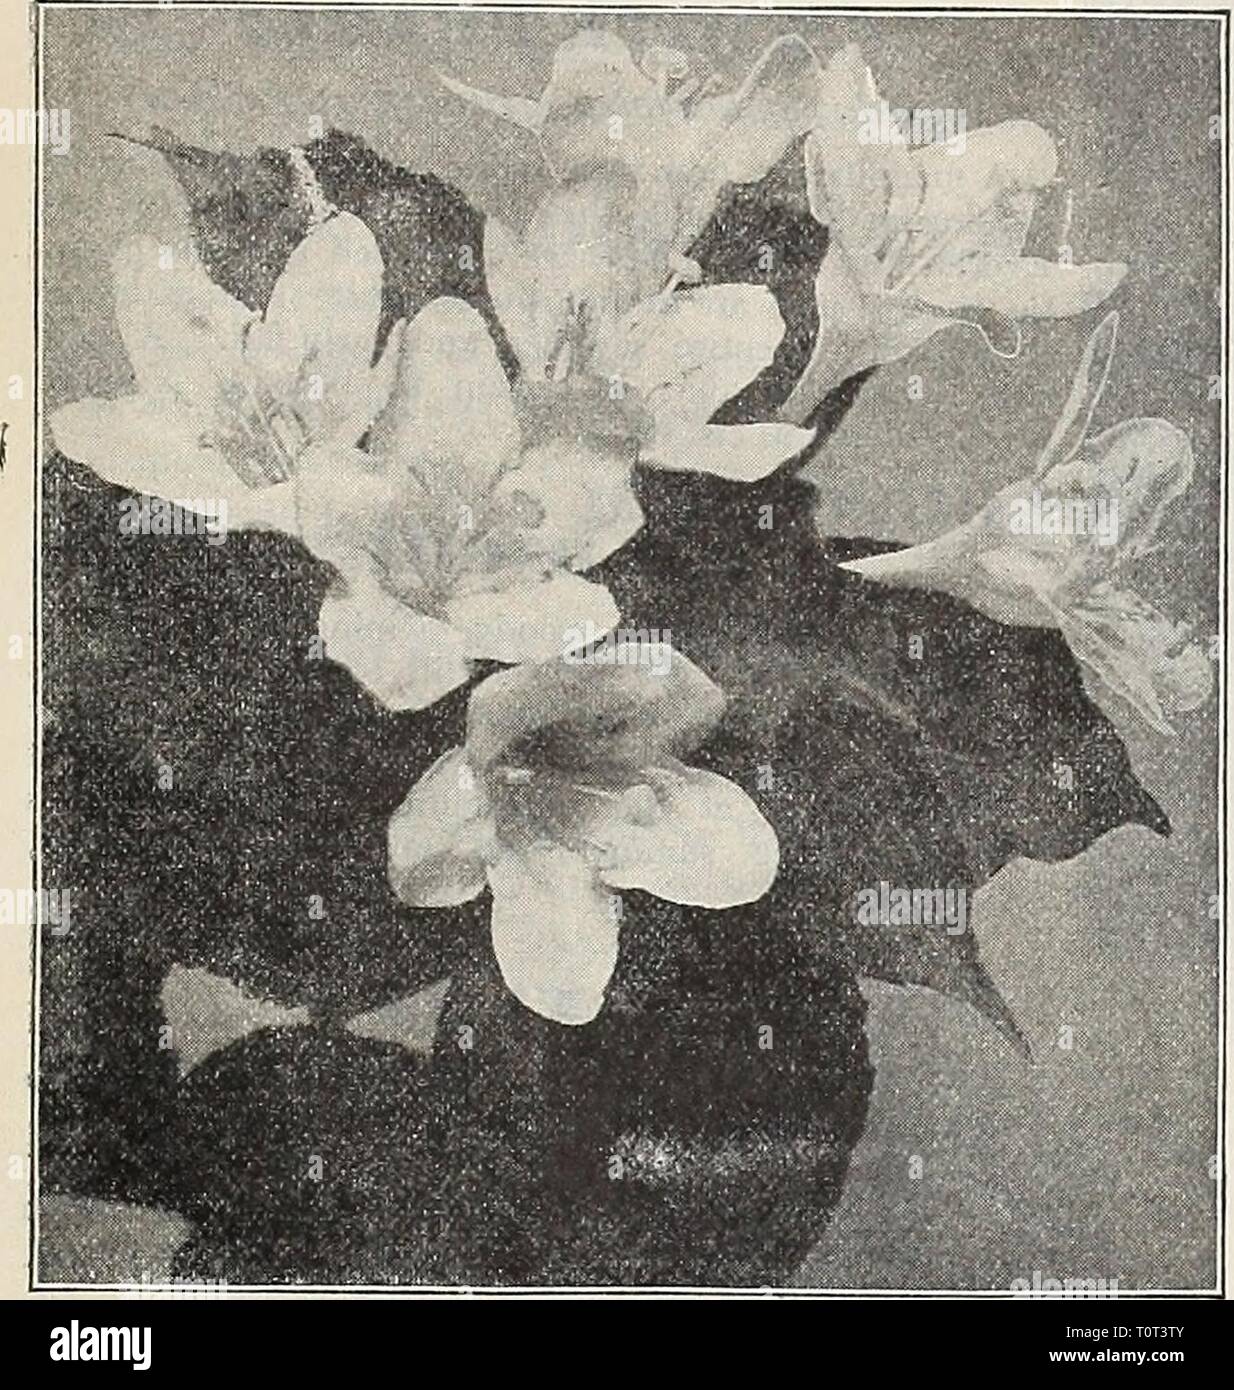 Dreer's 1909 garden book (1909) Dreer's 1909 garden book  dreers1909garden1909henr Year: 1909  ENRTAOREER-PHIIADEIPHIA-PA 225    Weigelia Rosea. Weigelia, Well-known, popular, free-flowering Shrubs, pro- ducing trumpet-shaped flowers of many shades of color during June and July. — Amabilis. A beautiful and distinct pink. 25 cts. each. — Coccinea. Rosy crimson; very free. 25 cts. each. — Candida. Fine pure white; flowers of large size. 25 cts. each. — Rosea. Soft rosy carmine. (See cut.) 25 cts. each. — Rosea Nana Variegata. A neat dwarf Shrub, valuable for the clearly defined variegation of gr Stock Photo